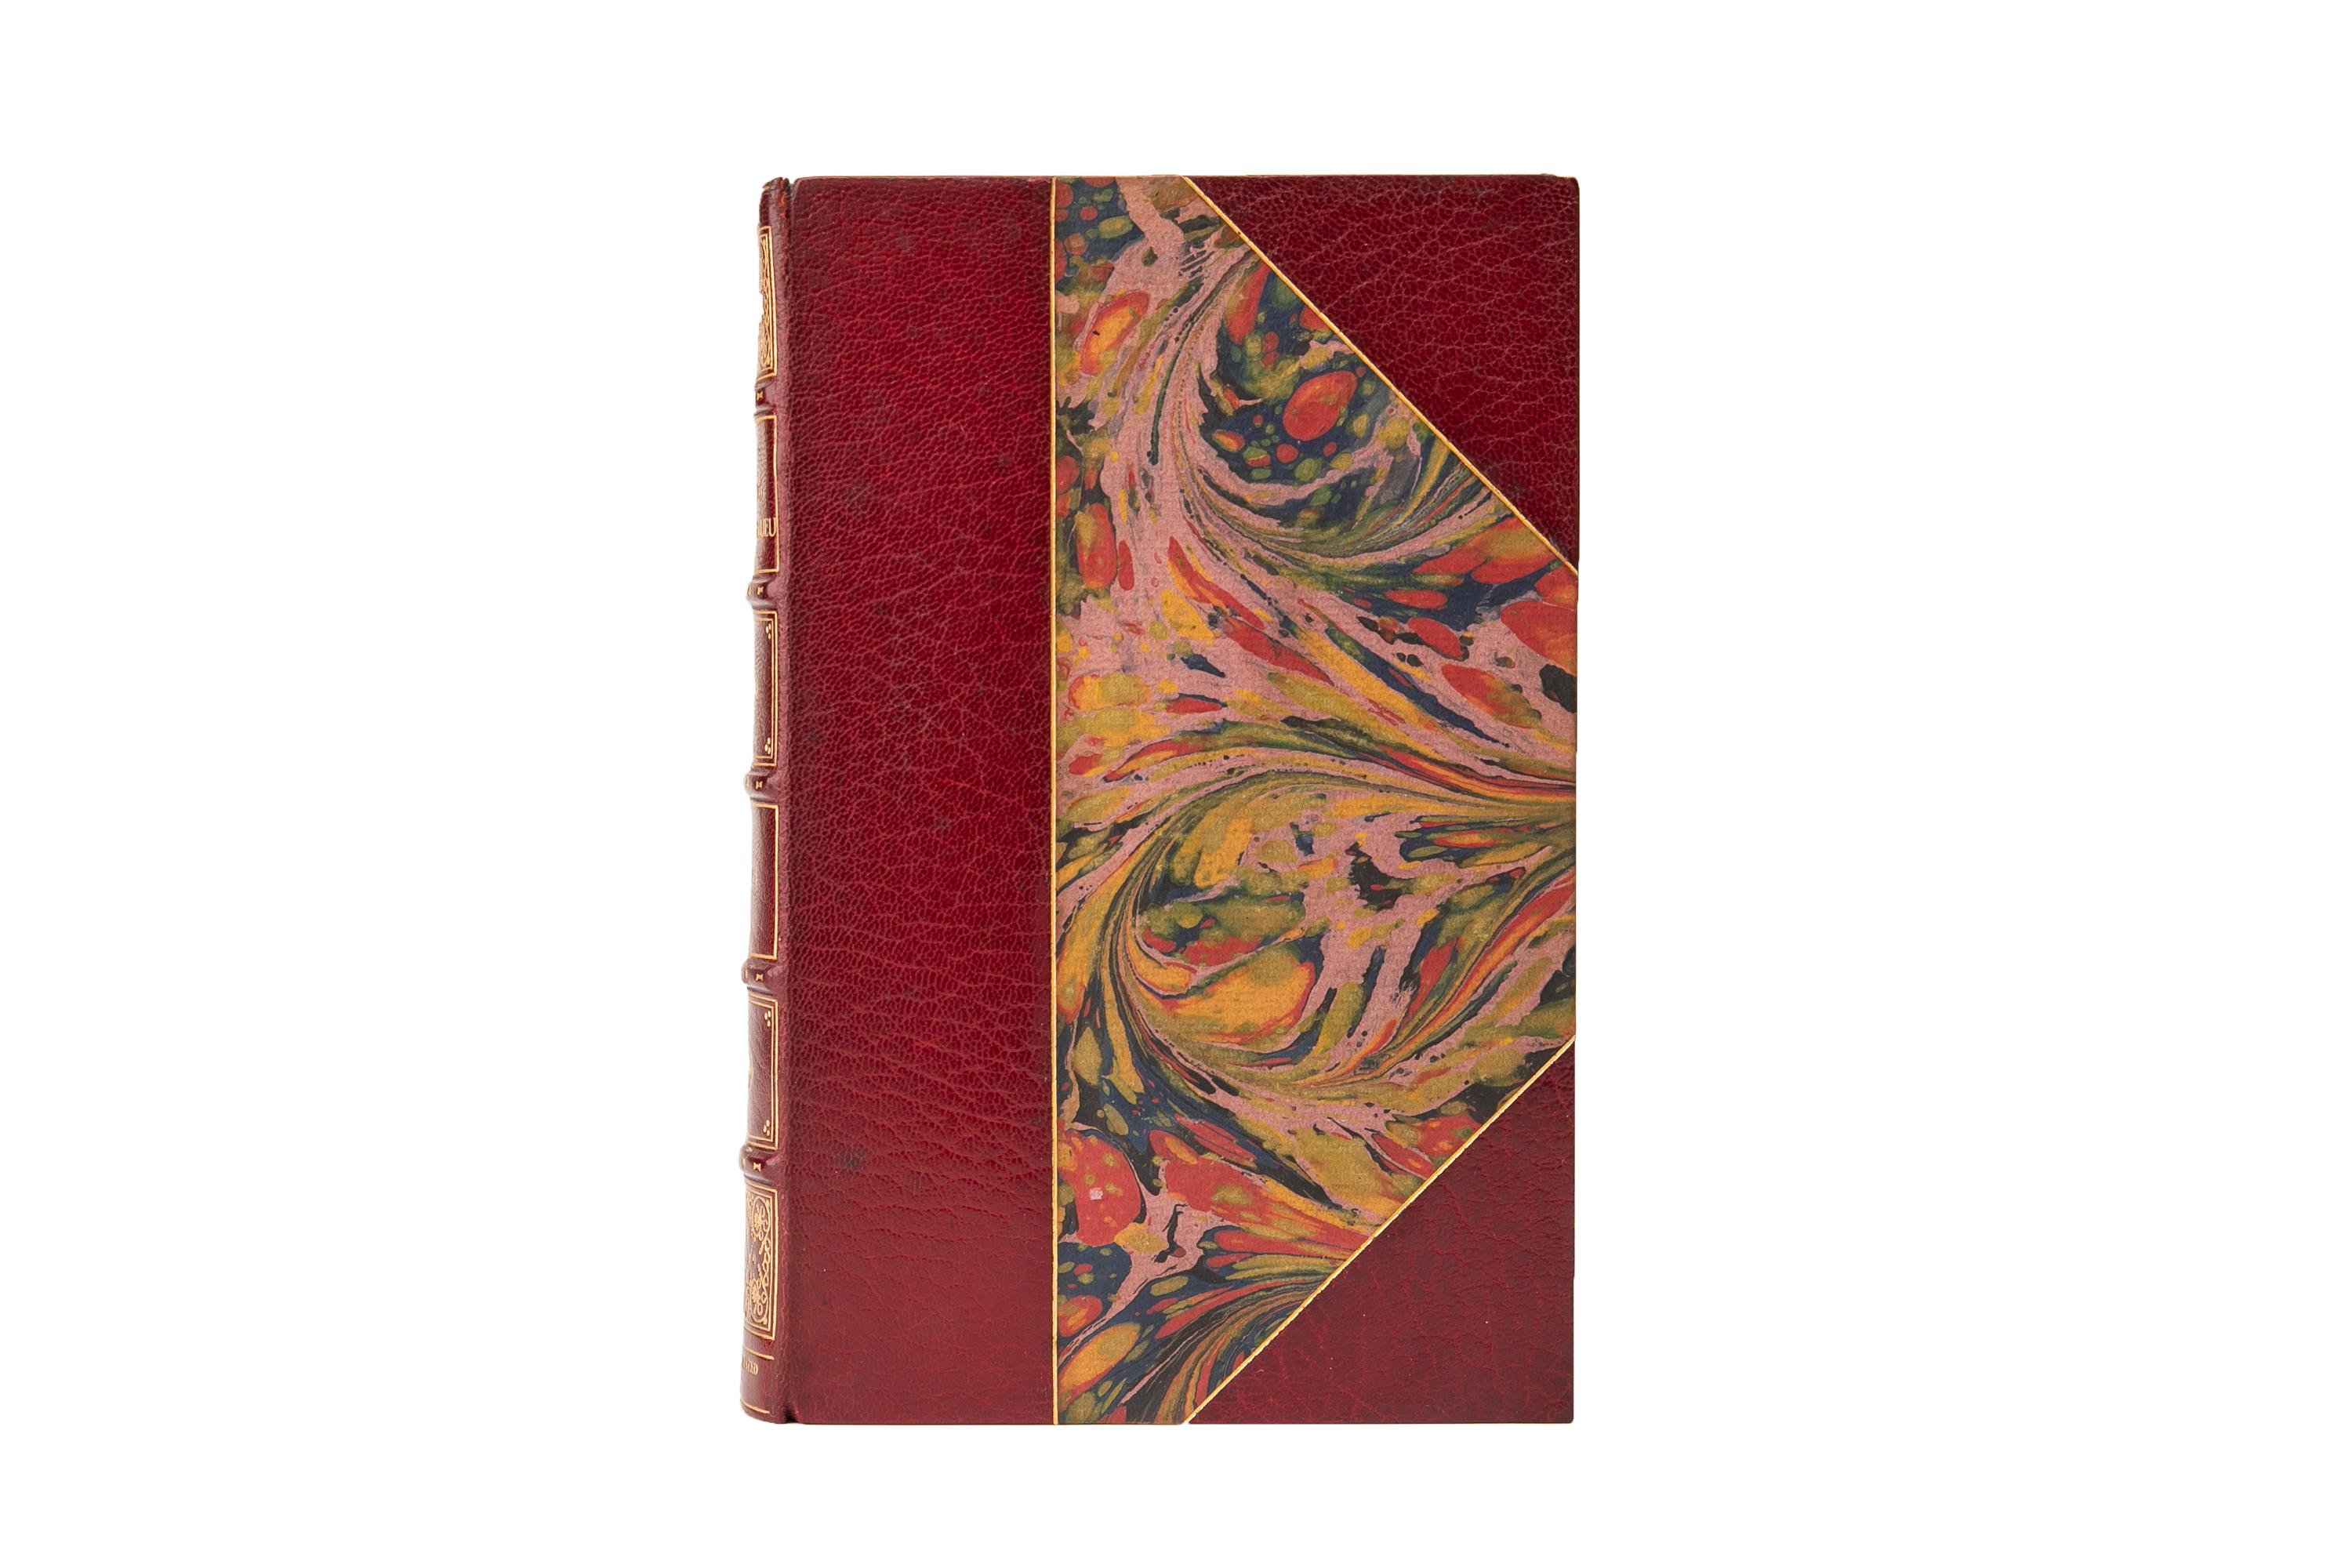 1 Volume. H. Noel Williams, The Fascinating Duc de Richelieu. Bound by Bayntun in 3/4 wine morocco and marbled boards with the covers and raised band spine decorated with gilt-tooling. The top edge is gilt with marbled endpapers. 20 extra plates, 6